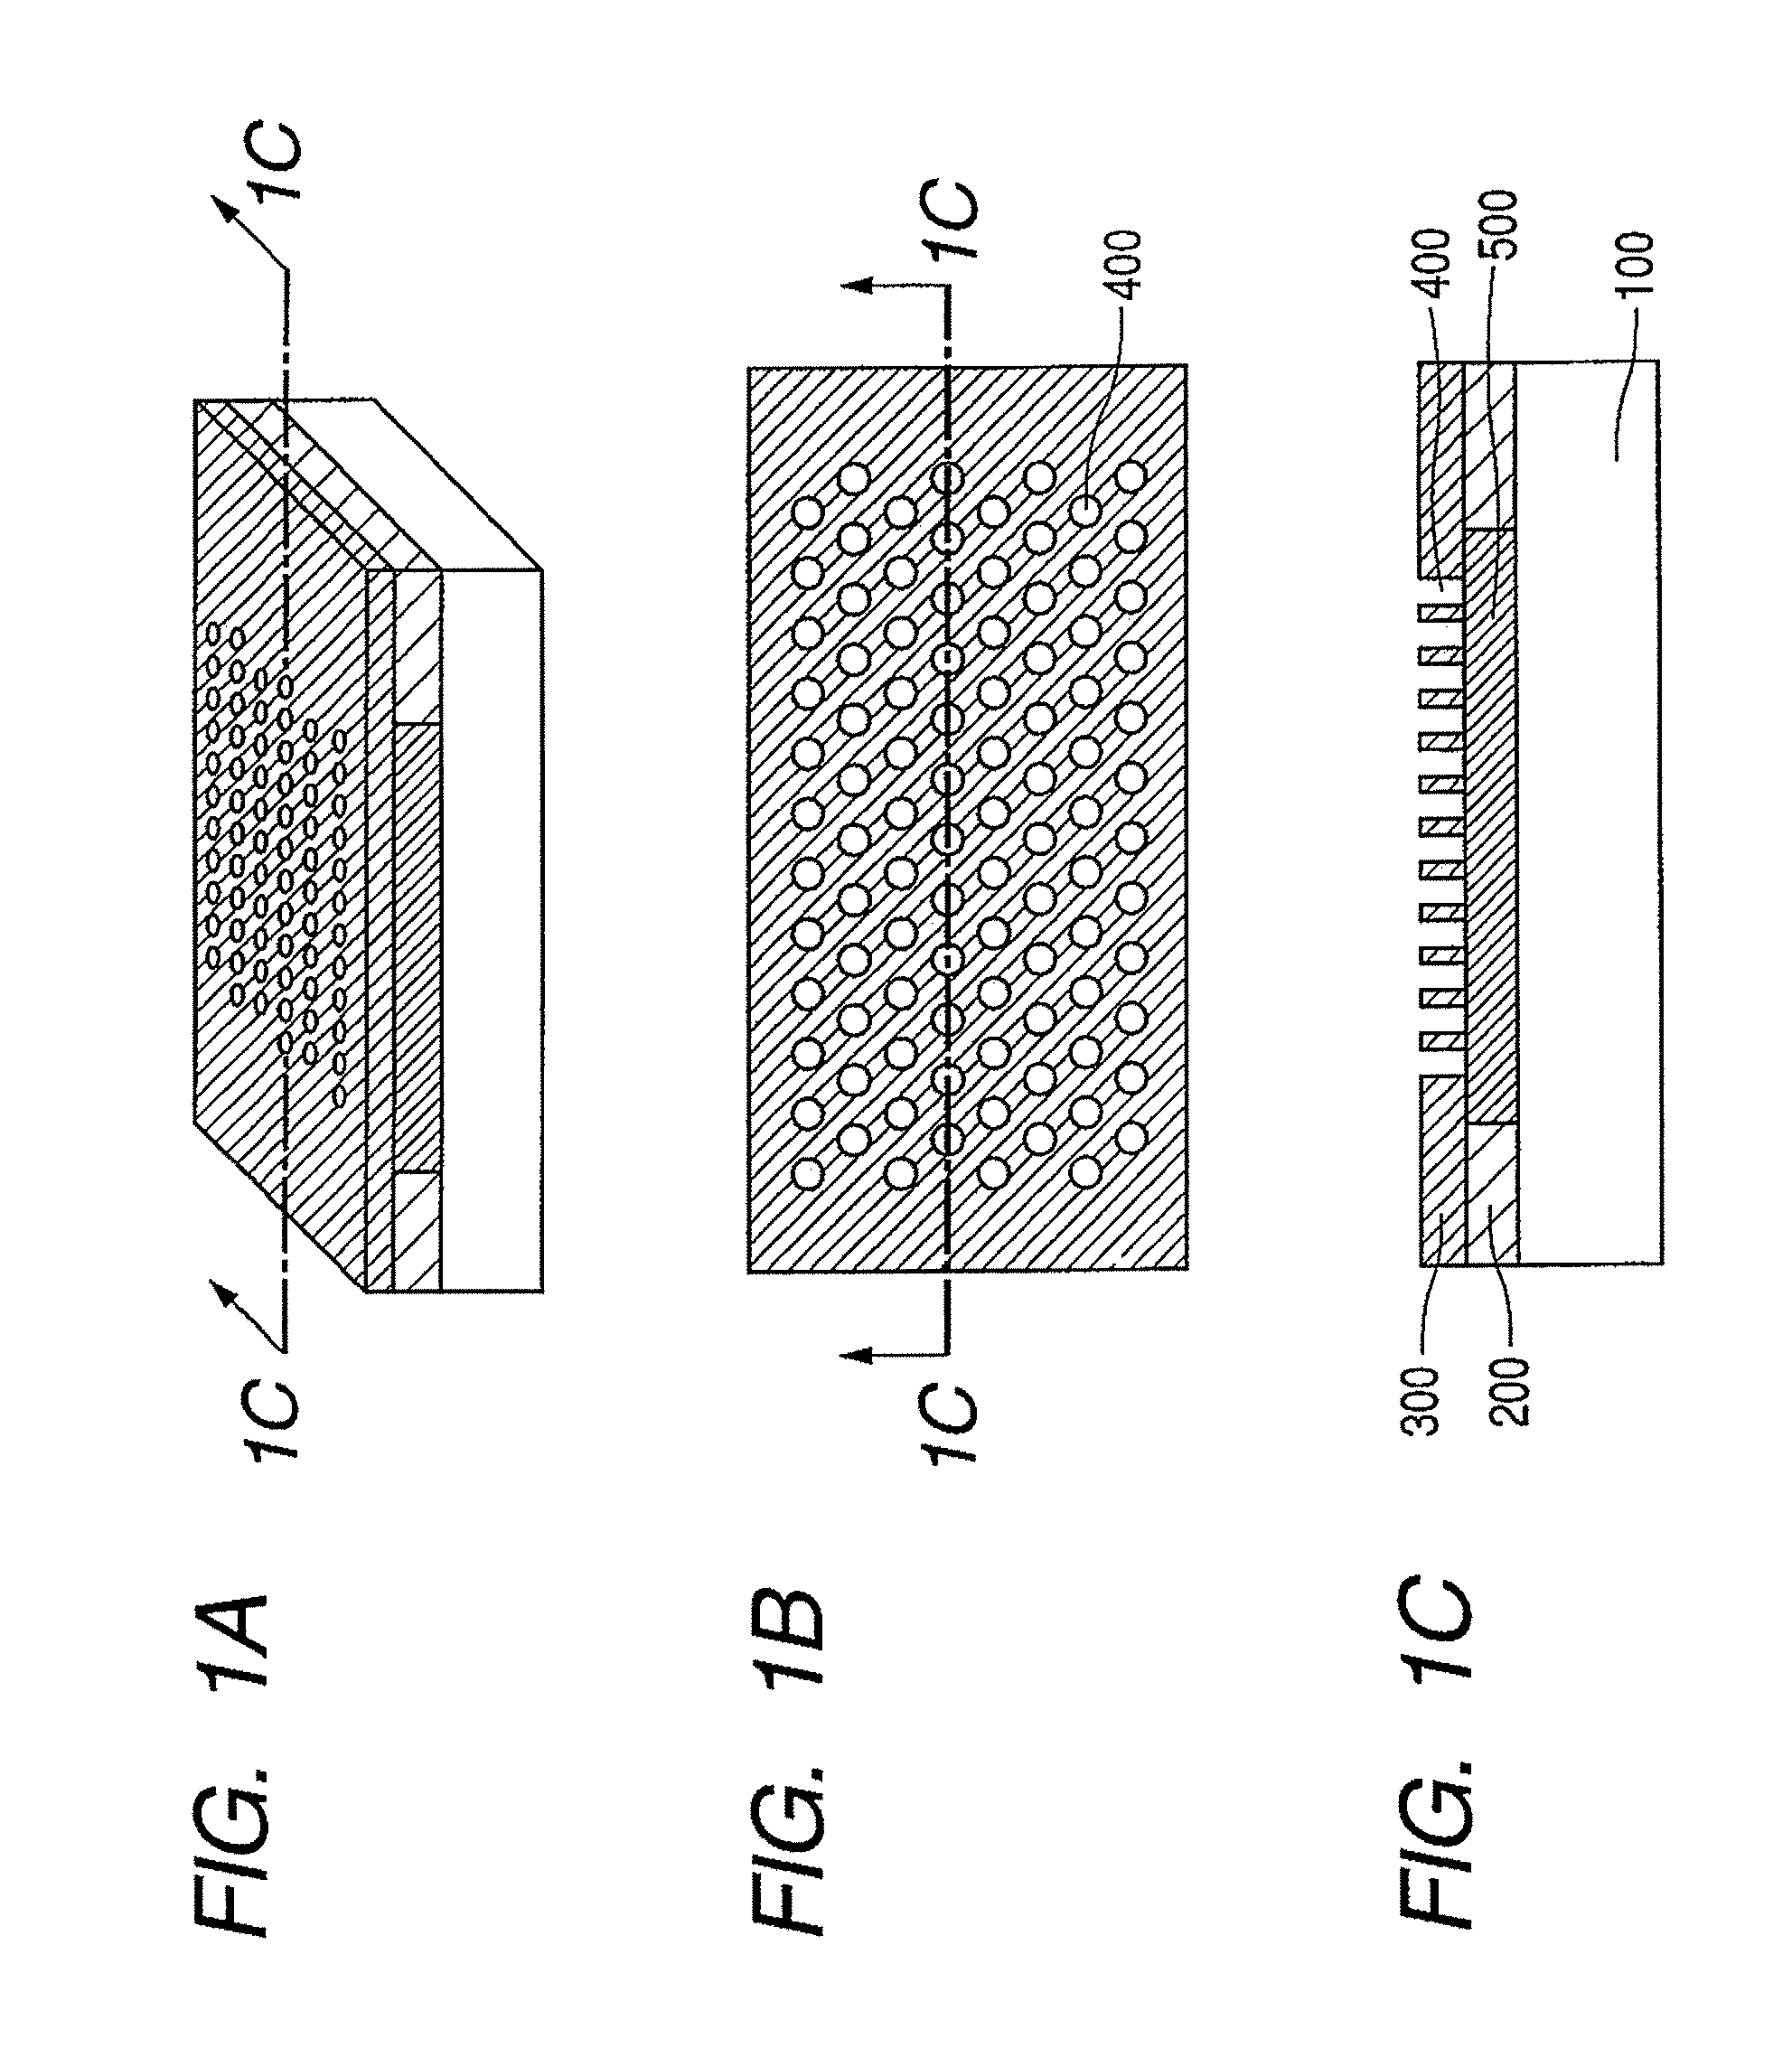 Optical element, method for manufacturing optical element and semiconductor laser device using the optical element